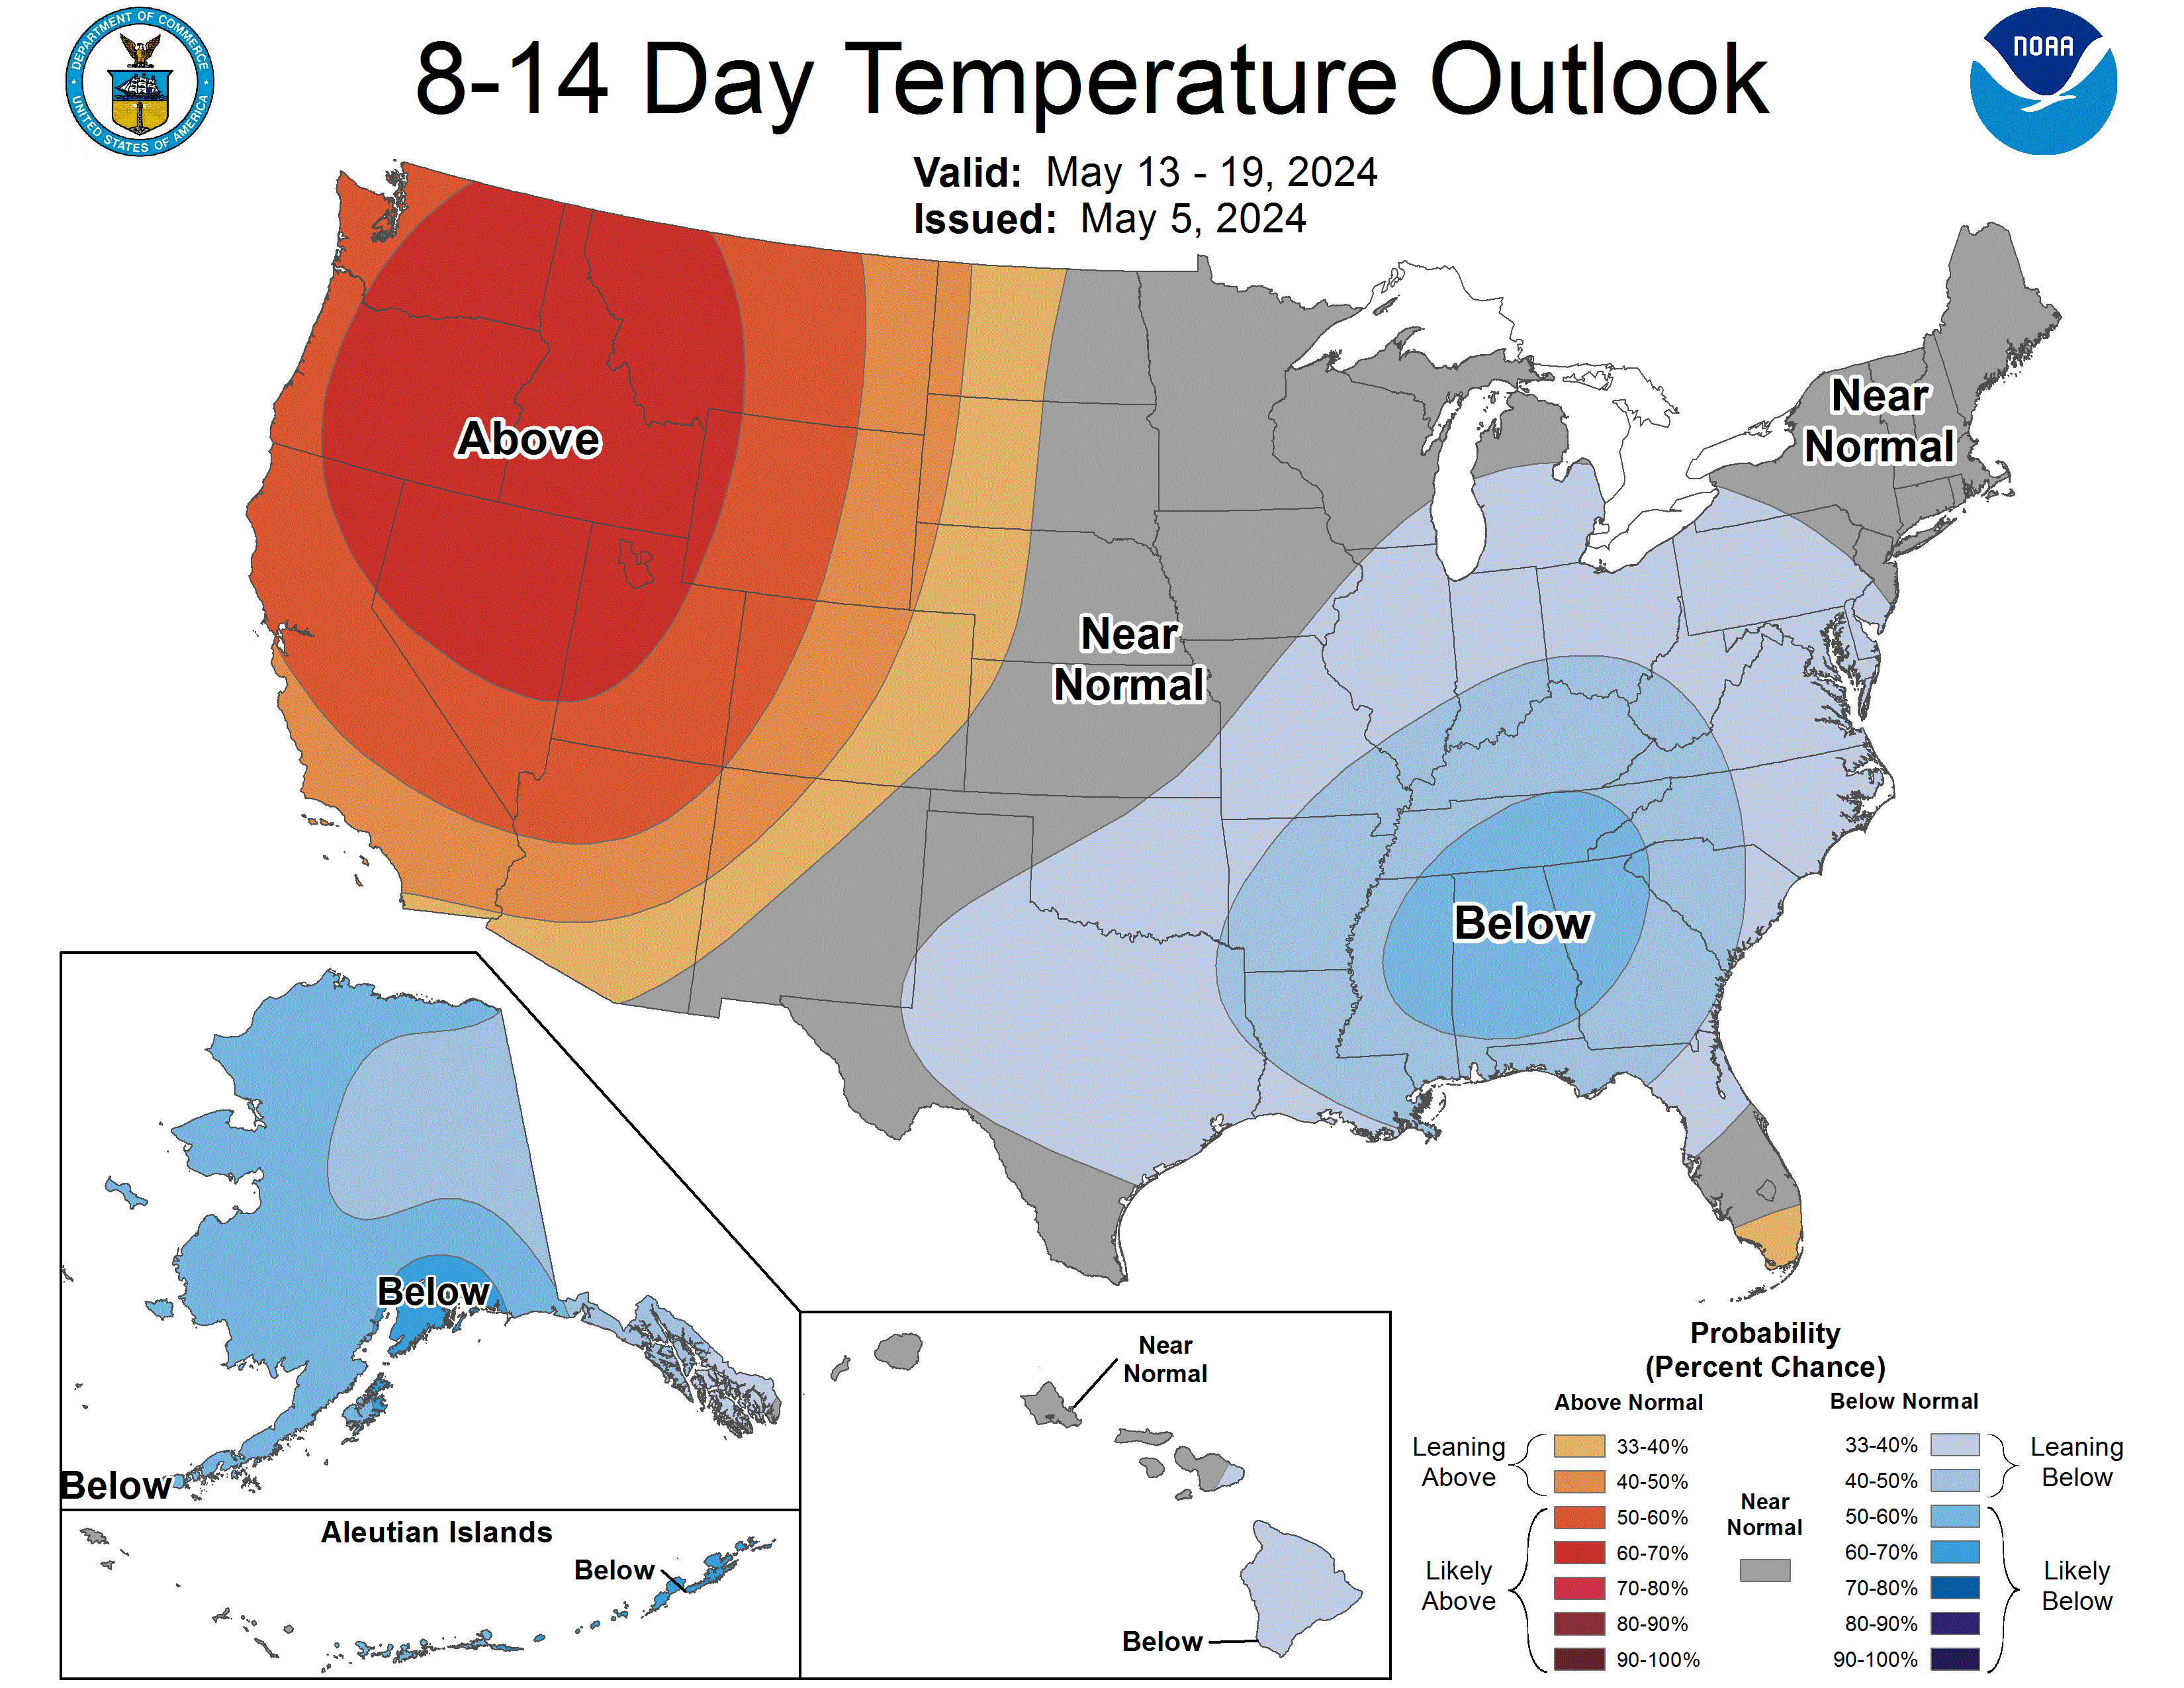 8 to 14 day temperatures